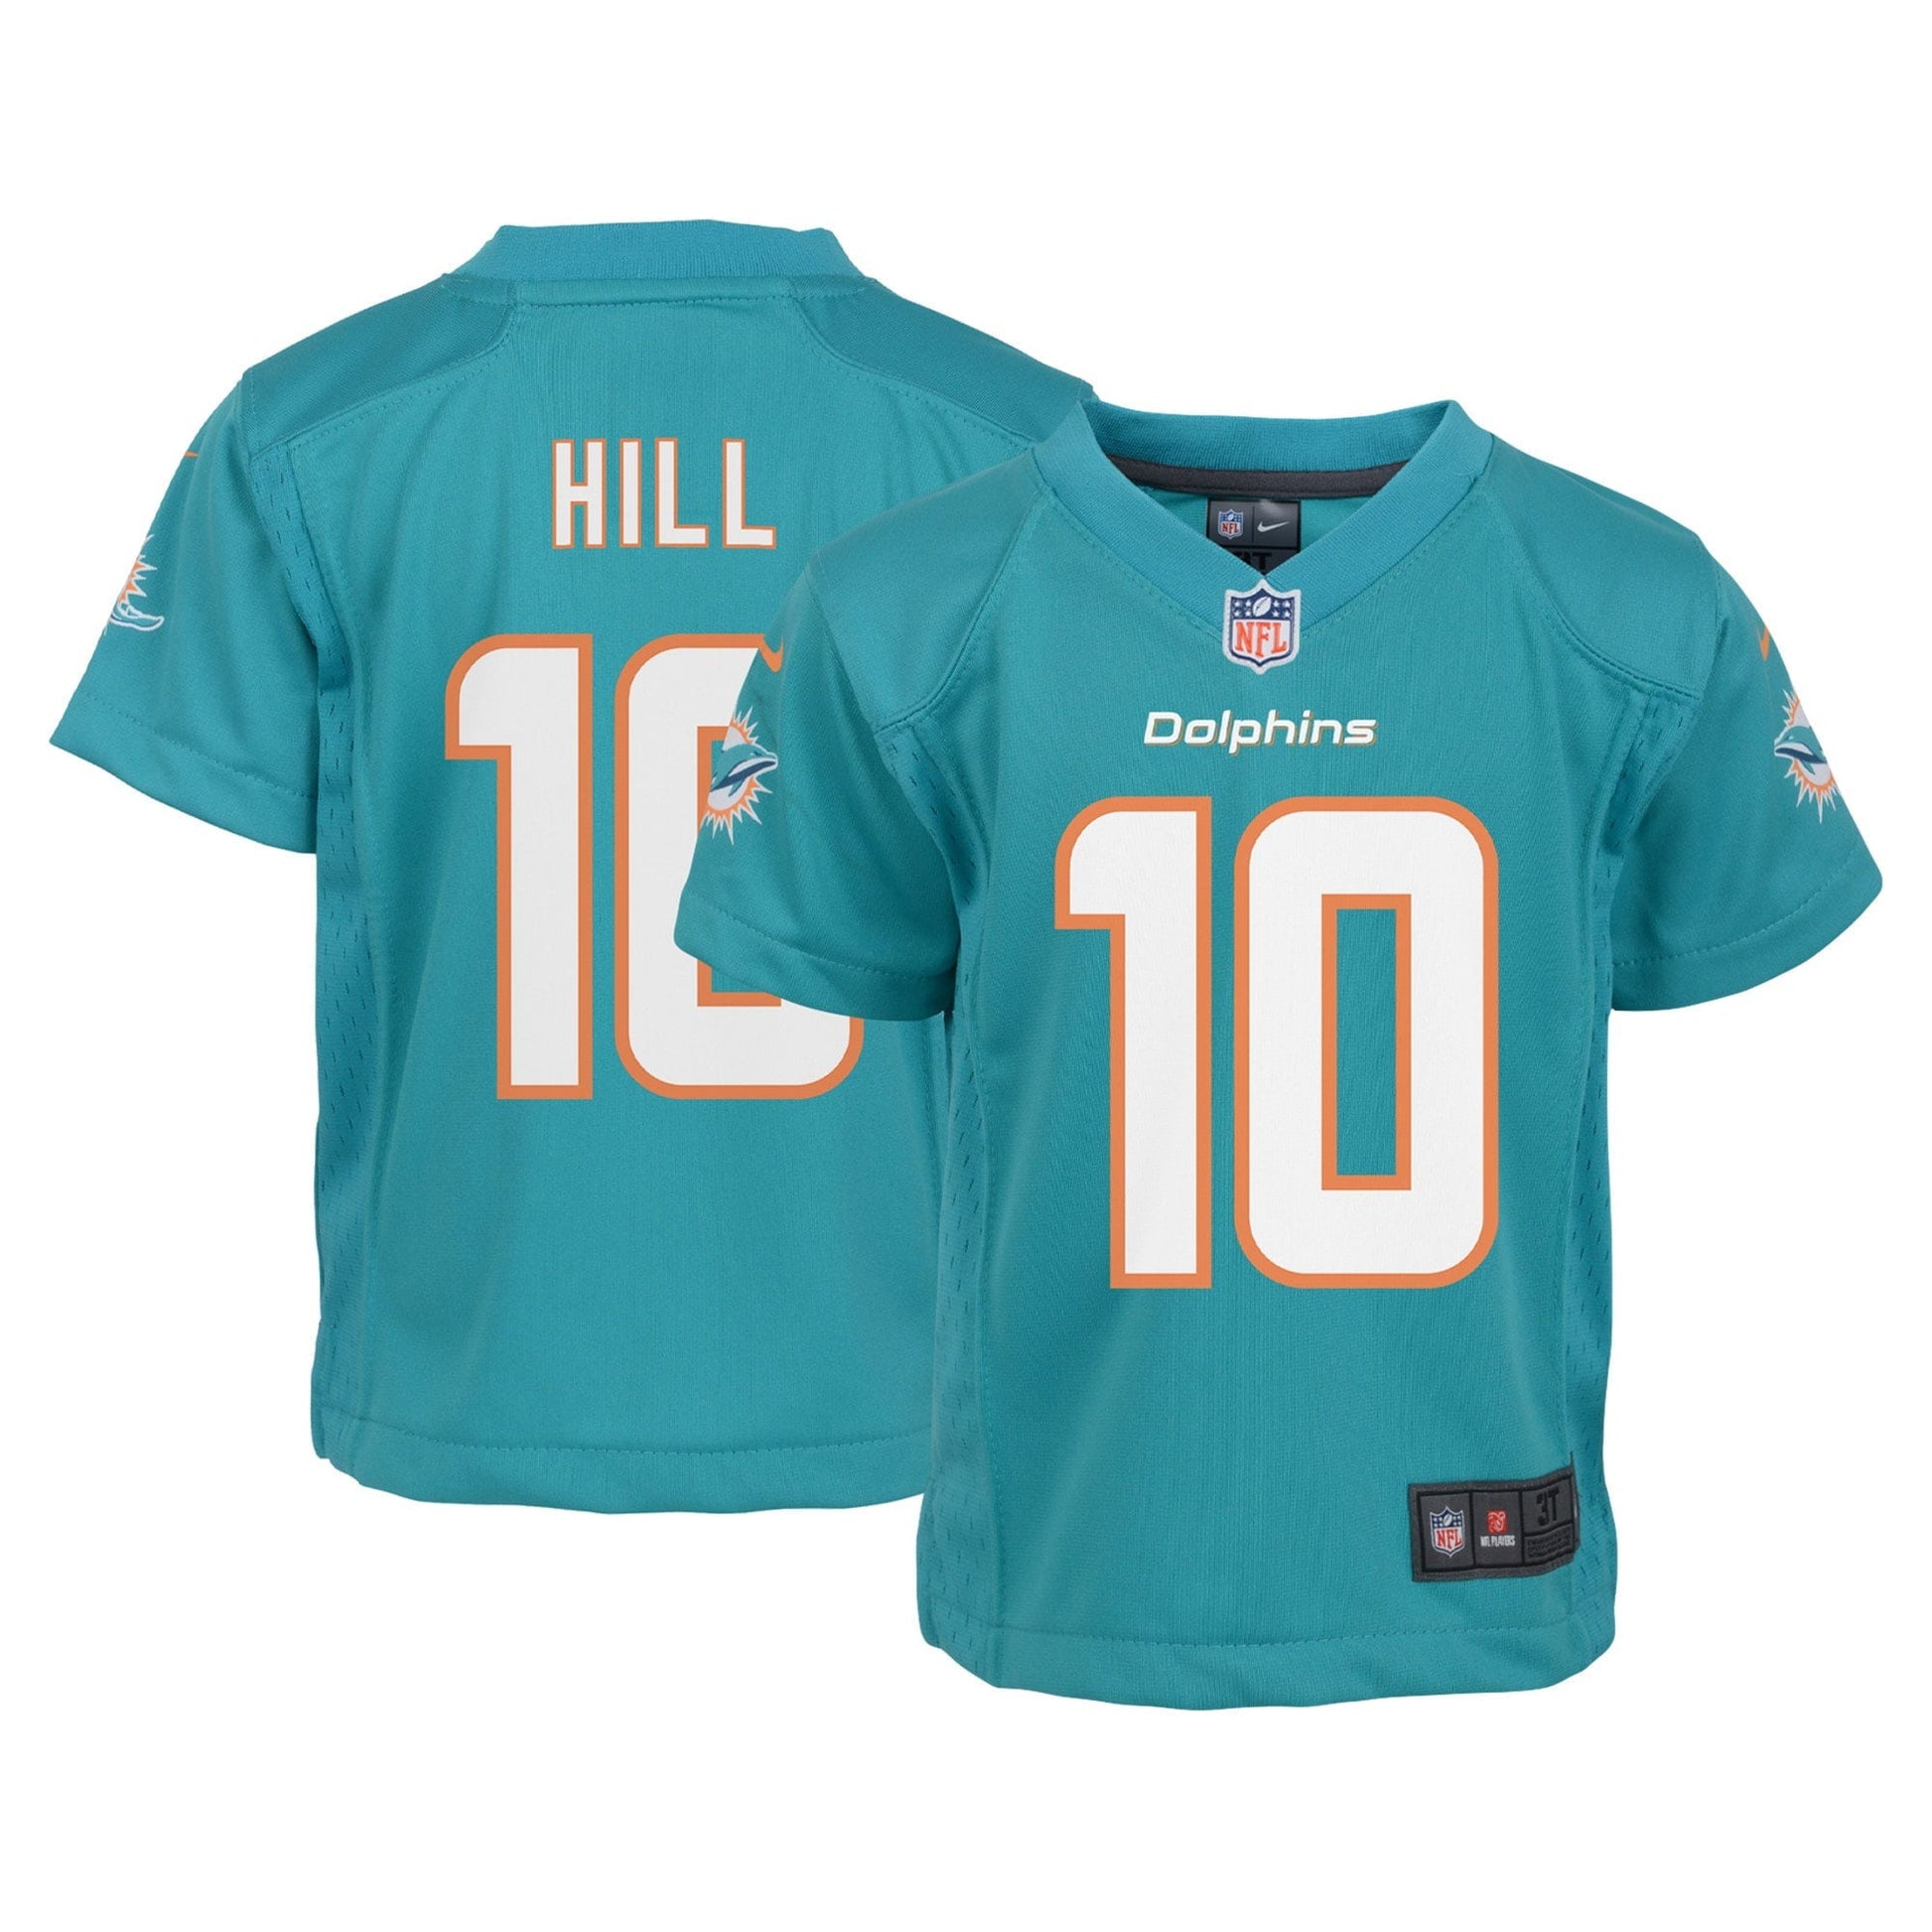 miami dolphins hill jersey